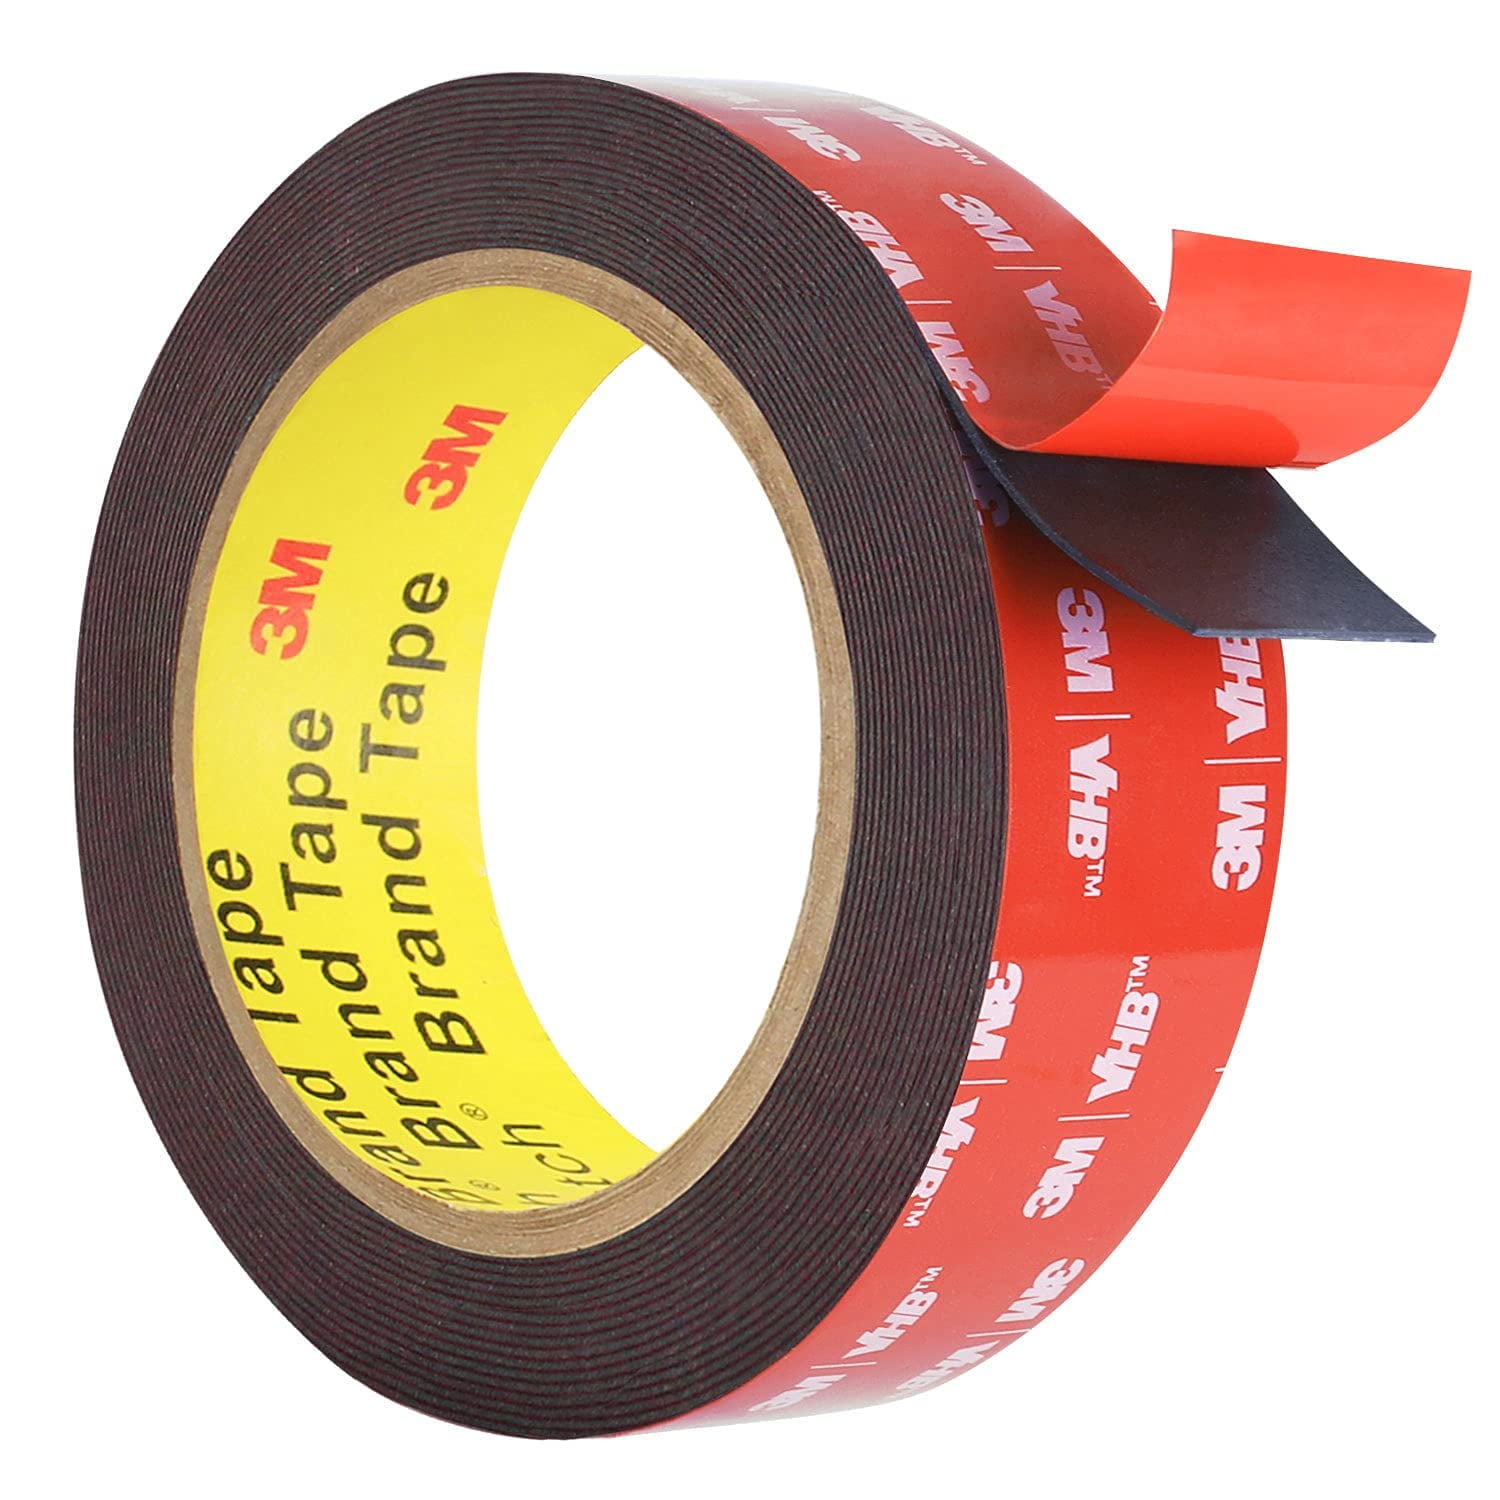 XFasten Thermal Tape, Double Sided Adhesive Tape for Electrical Insulating,  1 Inch x 90 Feet 